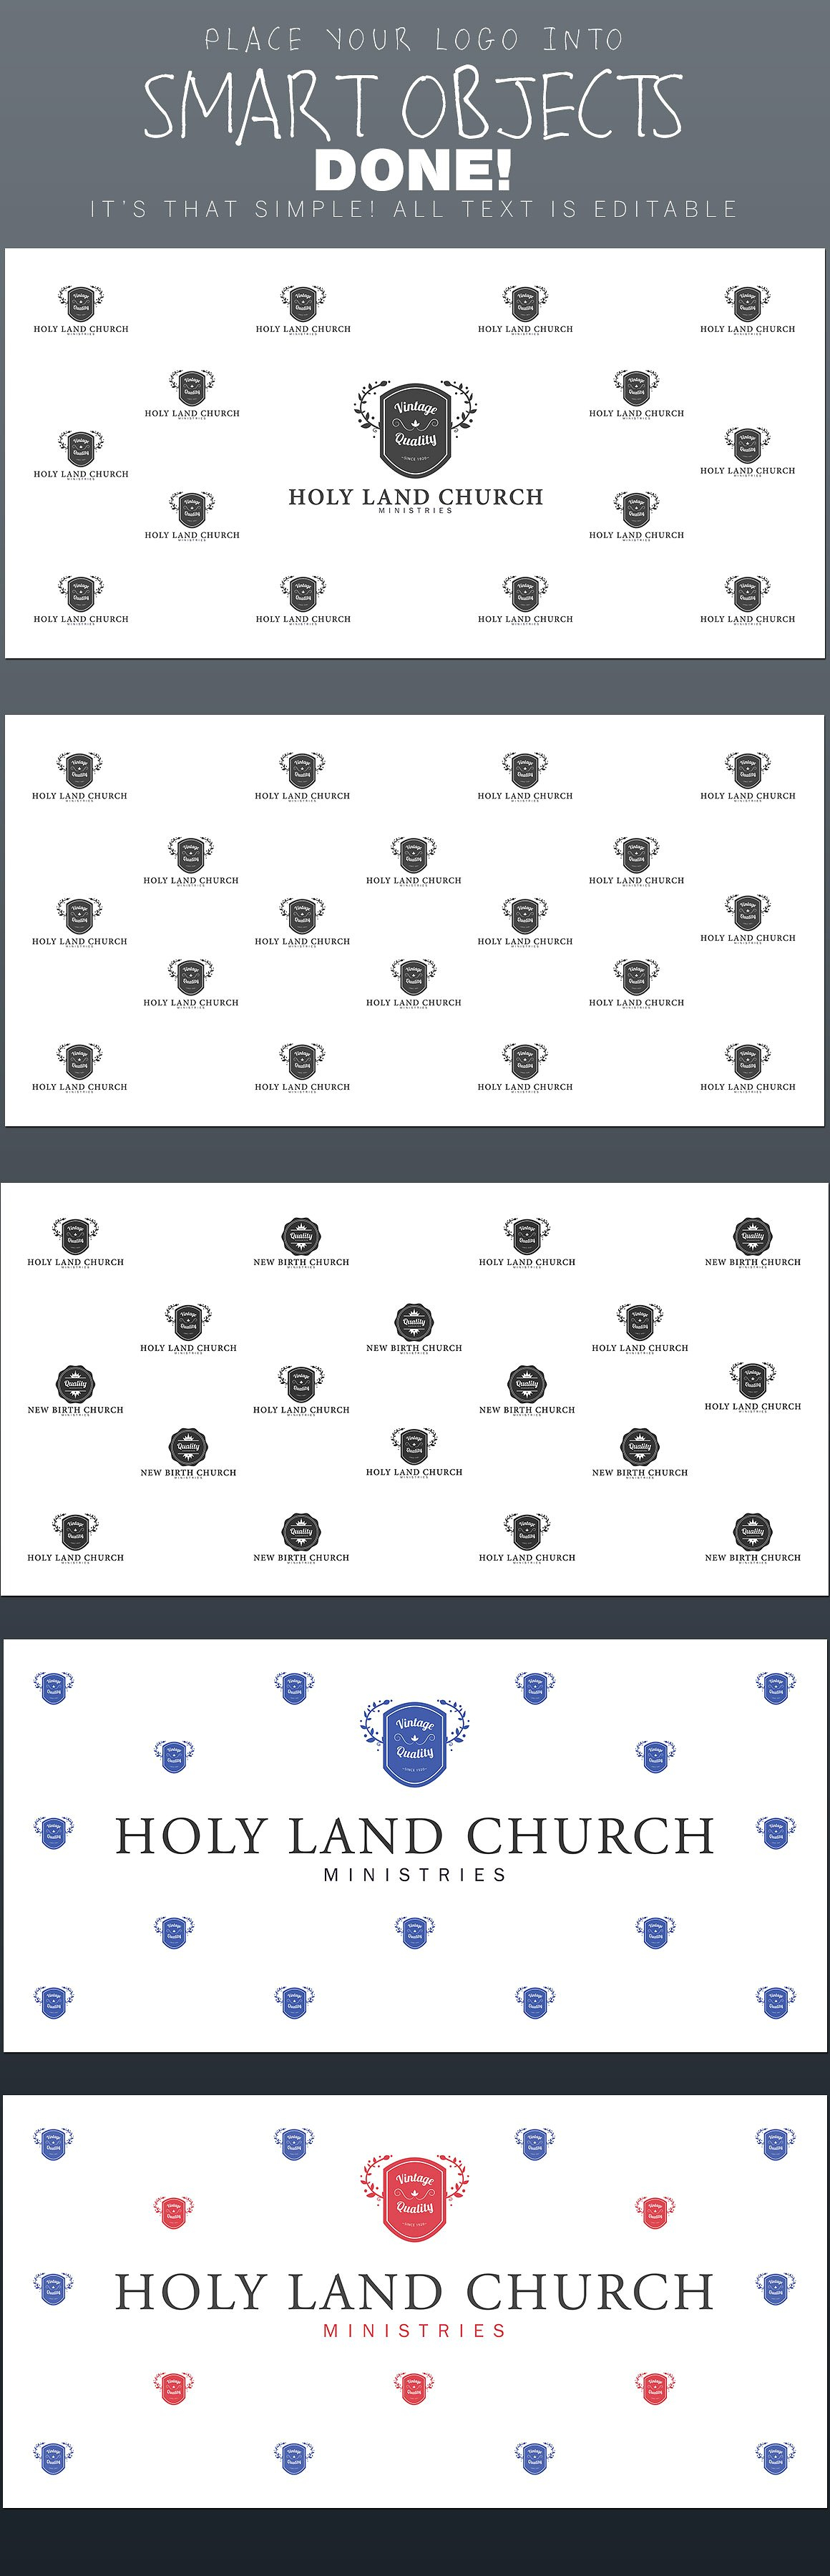 Step And Repeat Backdrop Photoshop Template For Step And Repeat Banner Template